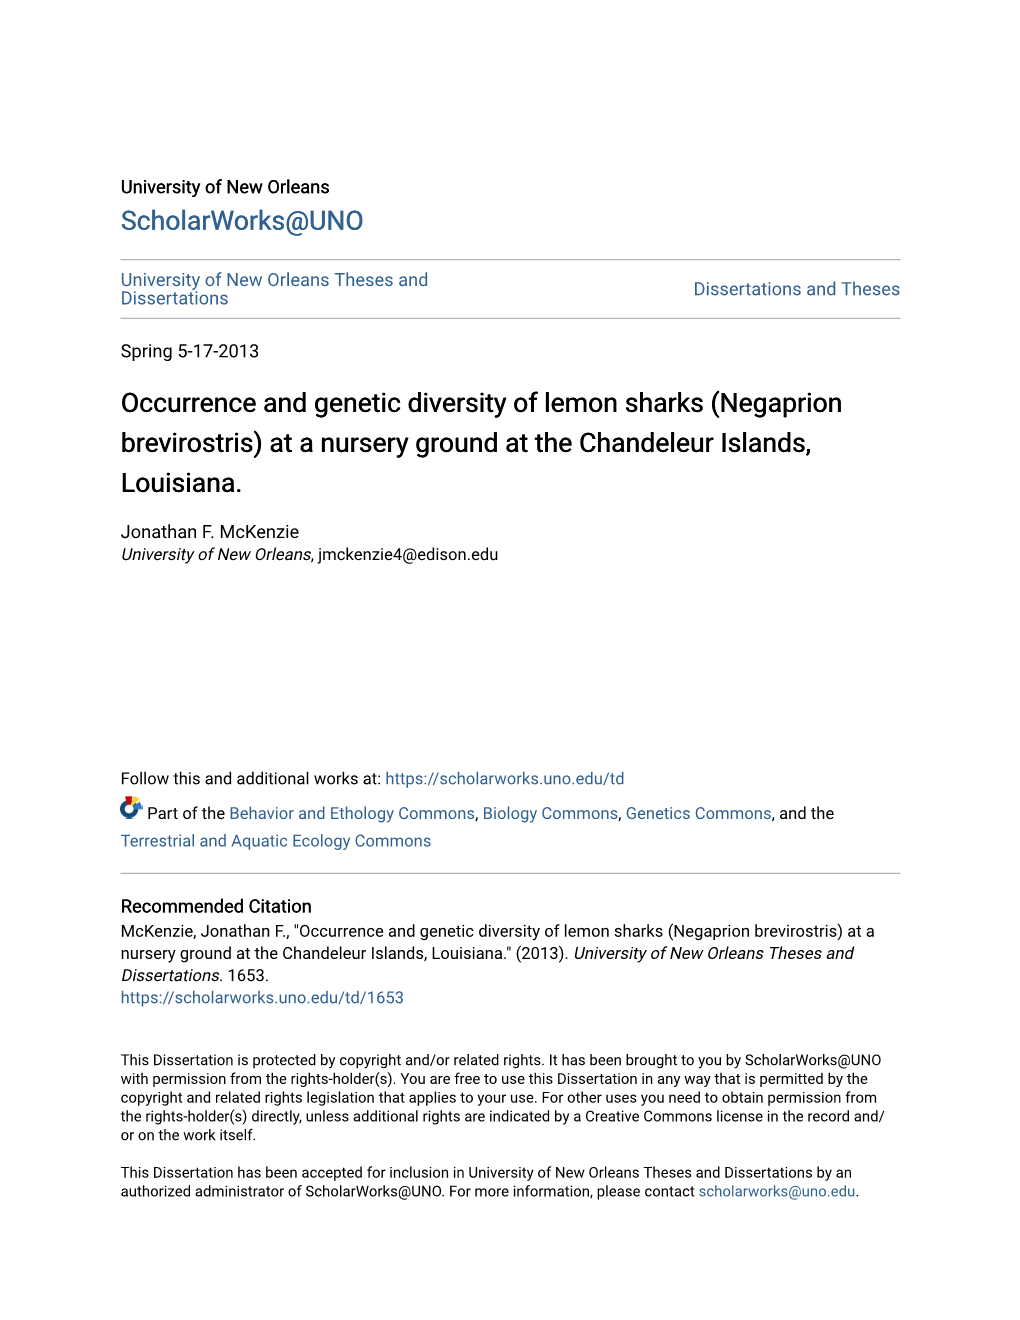 Occurrence and Genetic Diversity of Lemon Sharks (Negaprion Brevirostris) at a Nursery Ground at the Chandeleur Islands, Louisiana